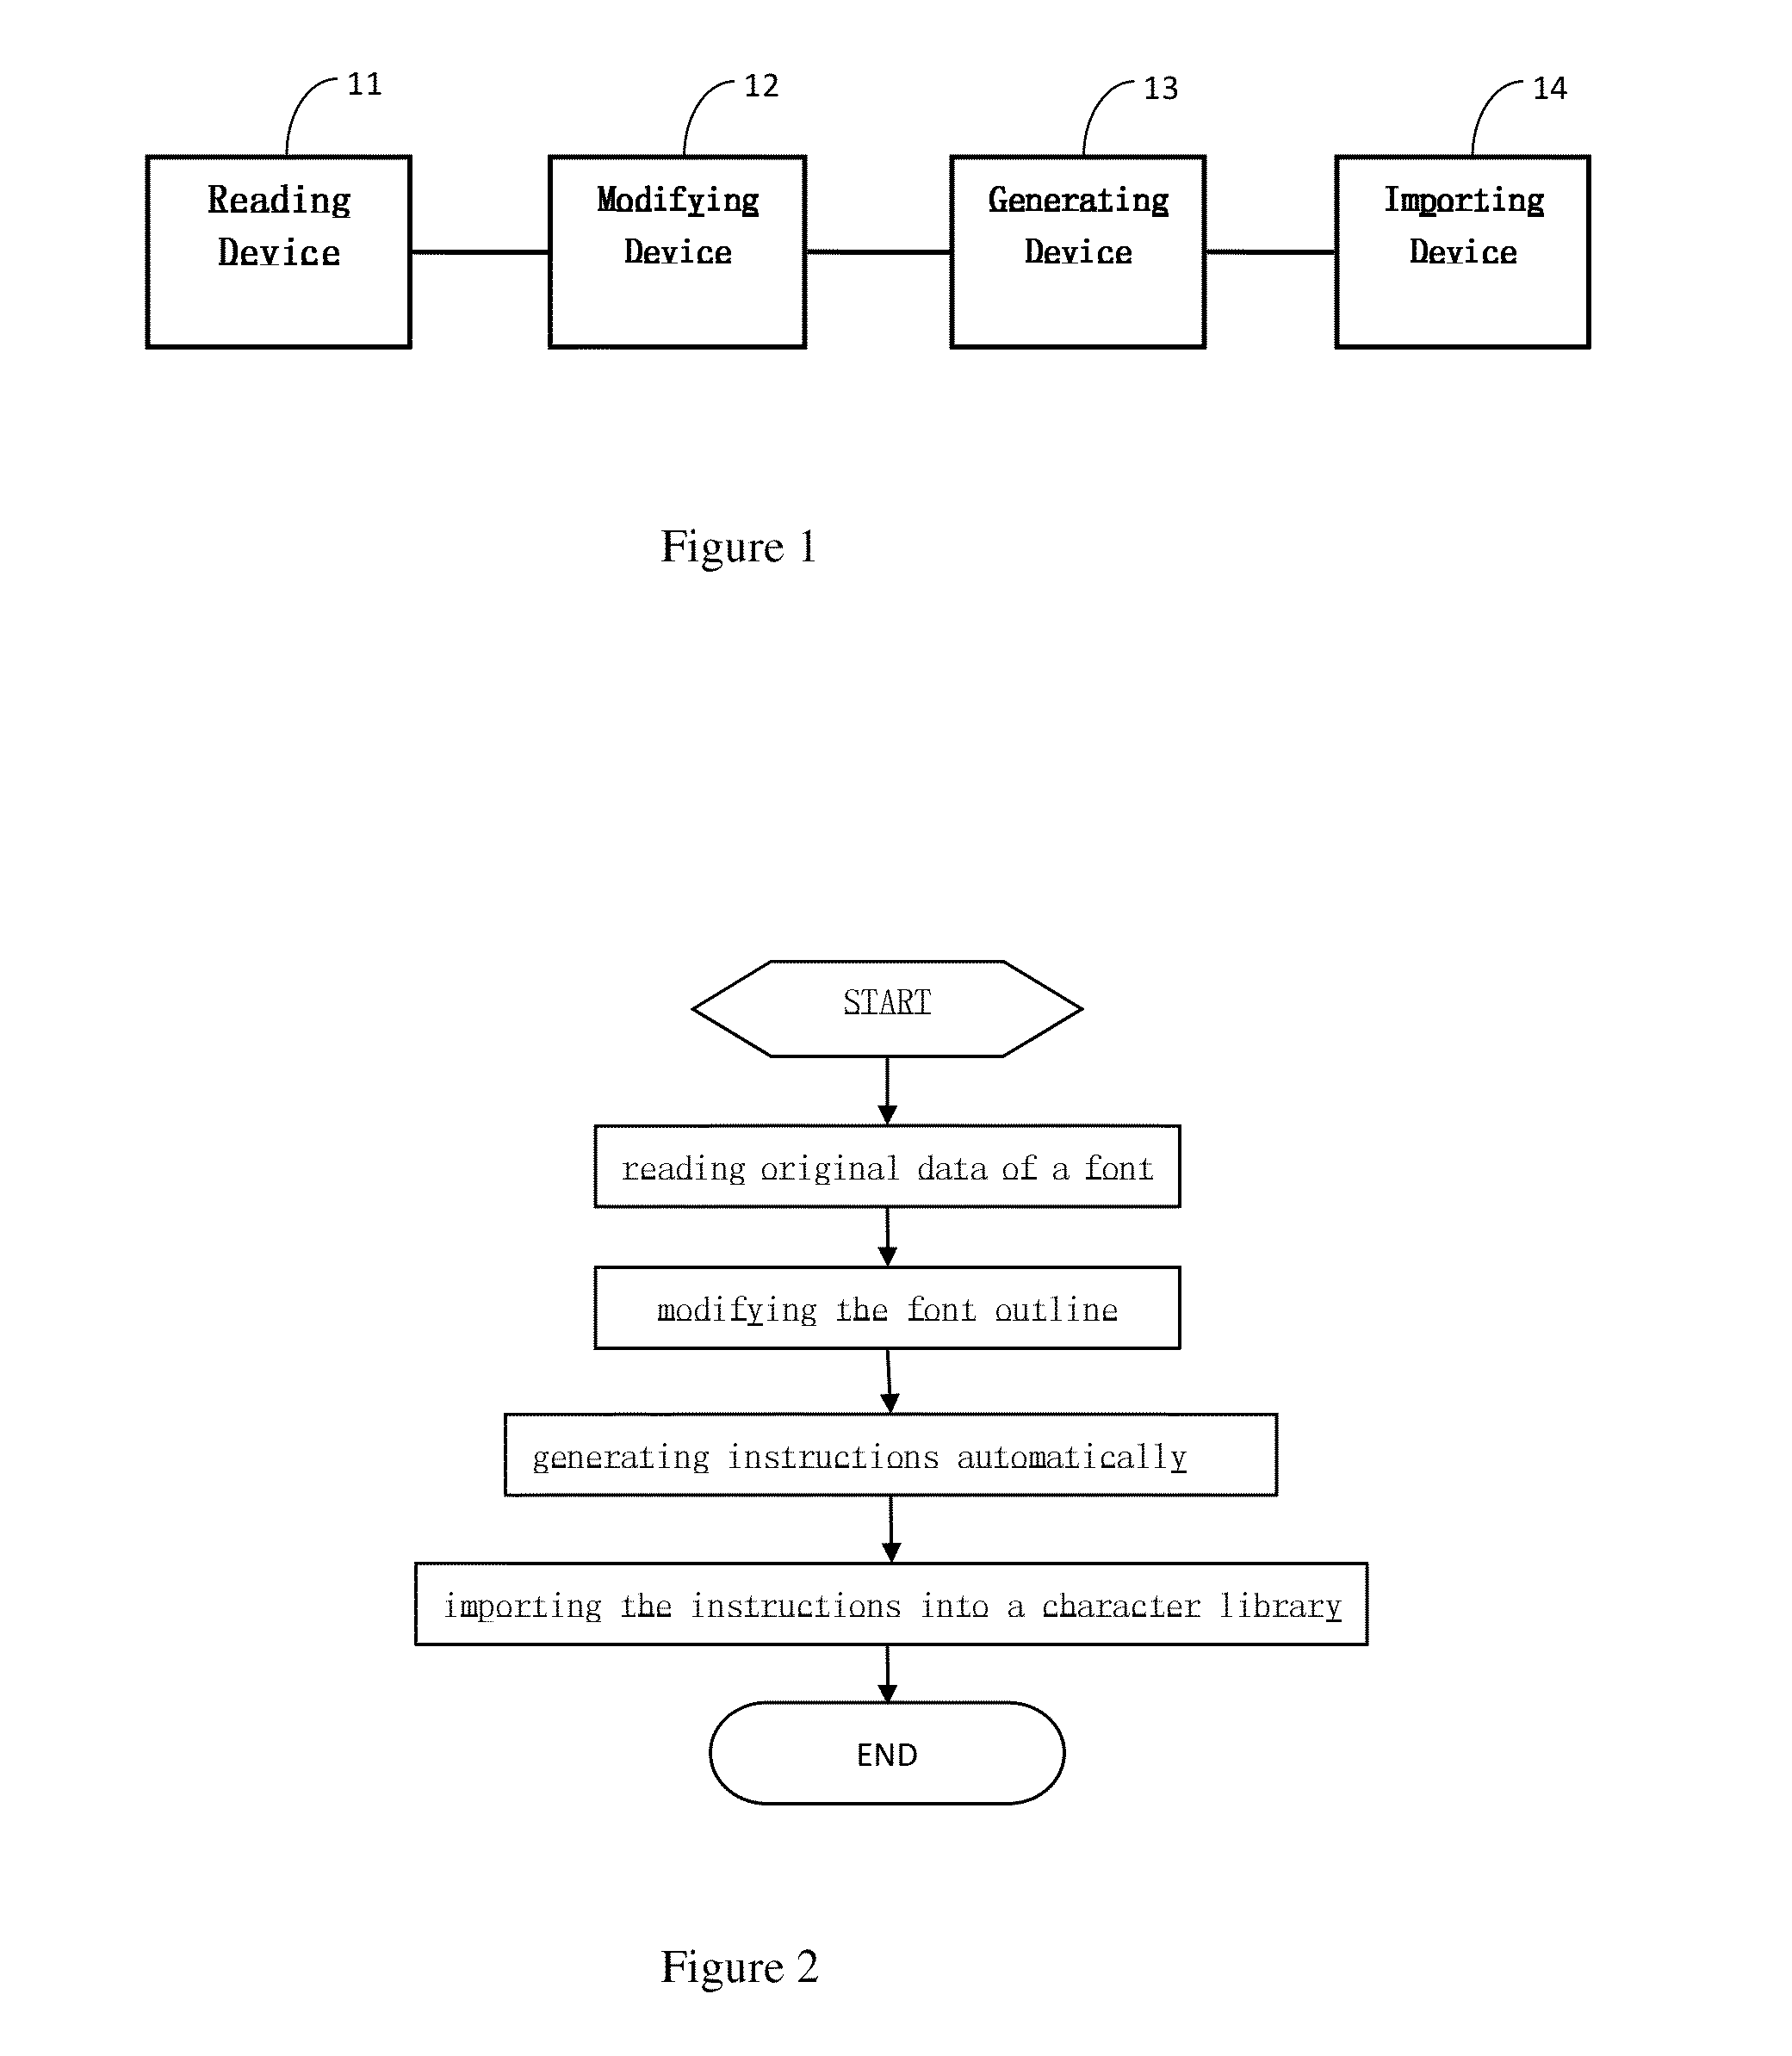 Method and System for Generating Instructions According to Change of Font Outline